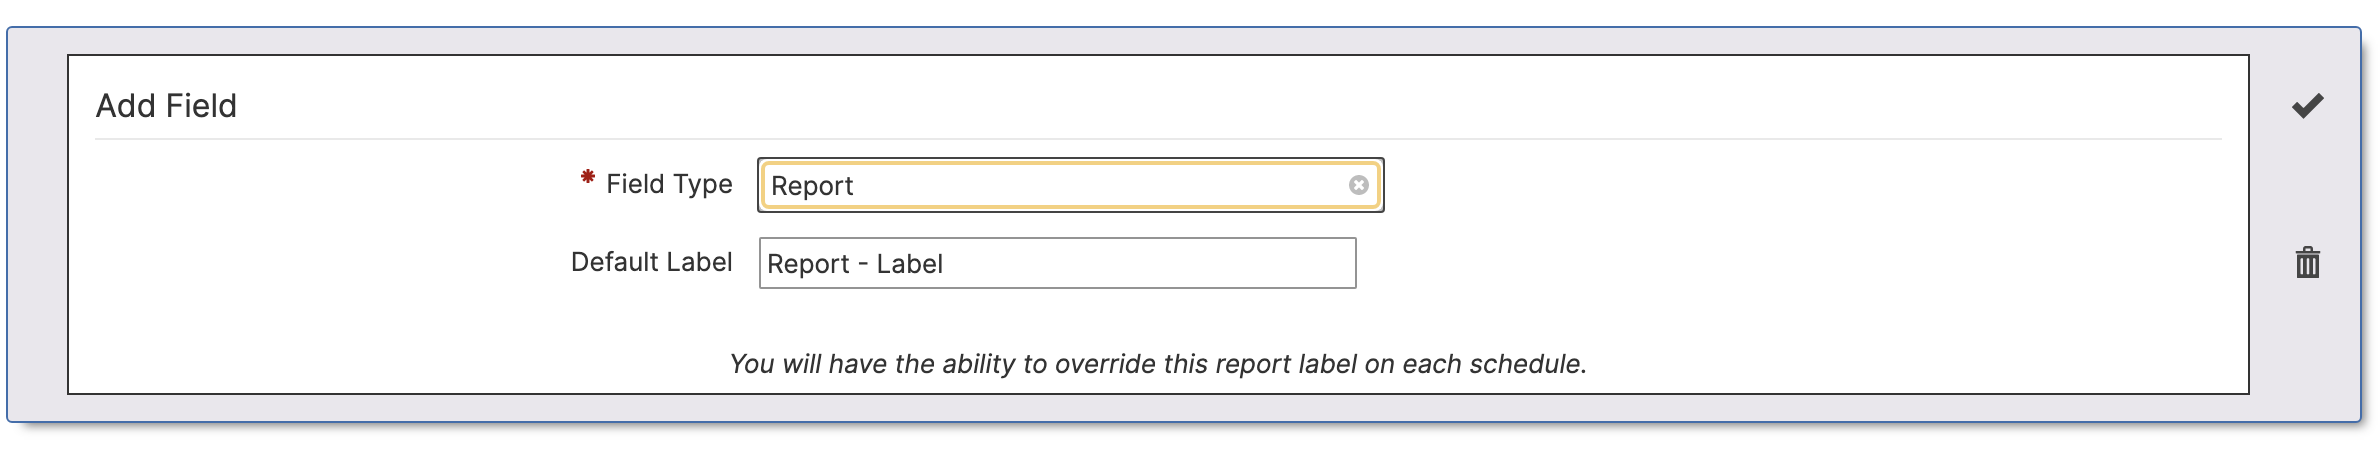 Faculty_Success_-_RPT_-_Set_a_label_for_your_report_field.png